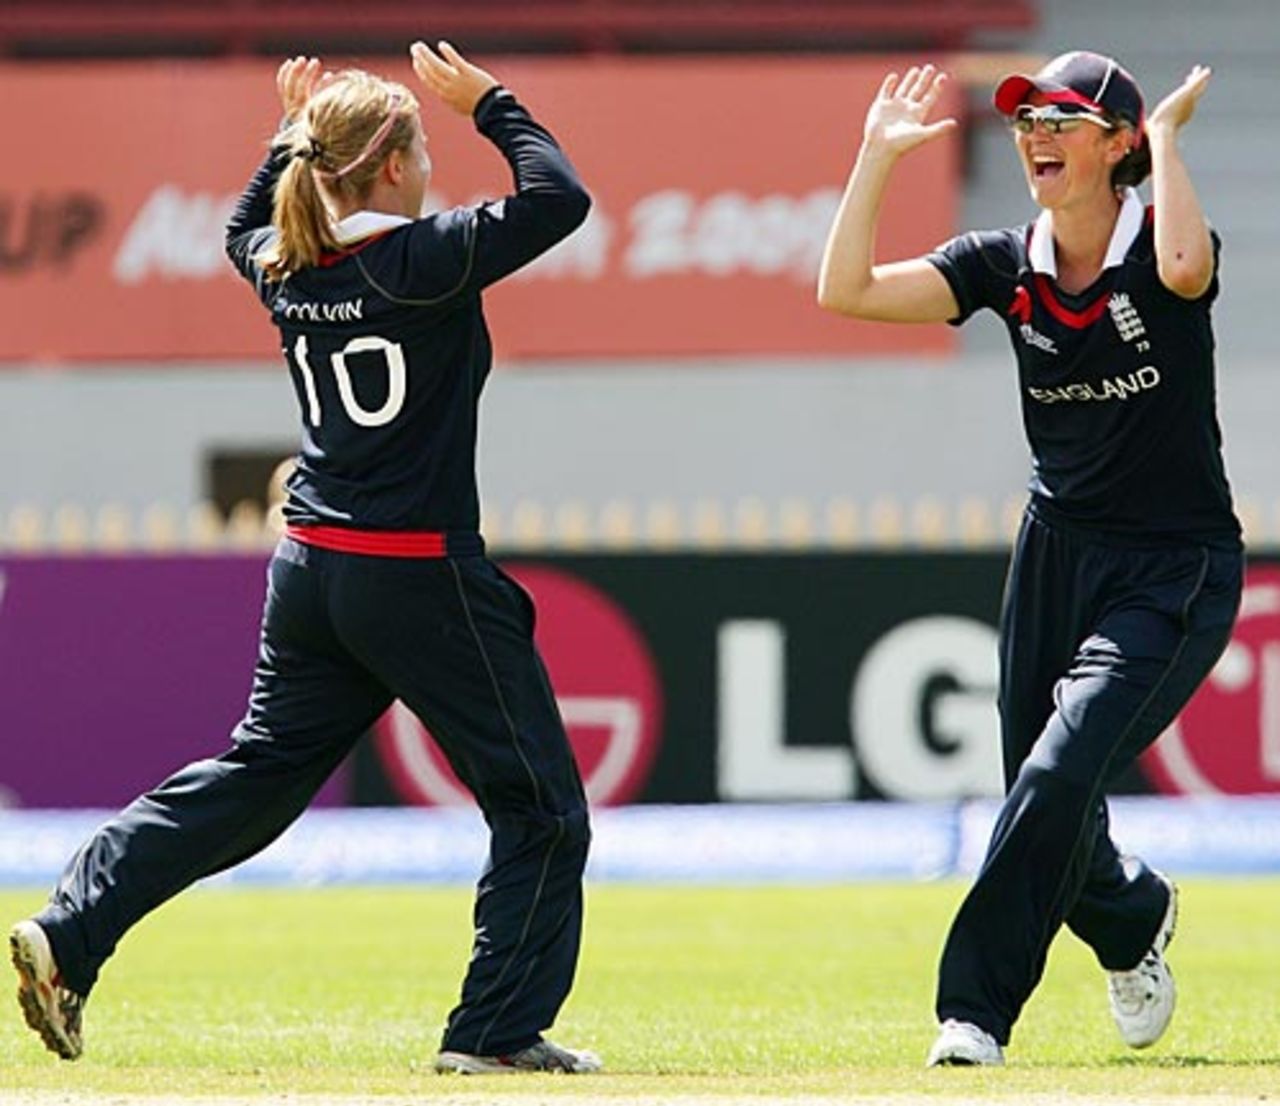 Holly Colvin had figures of 1 for 8 in ten overs, with seven maidens, England v Pakistan, Group B, women's World Cup, Sydney, March 12, 2009